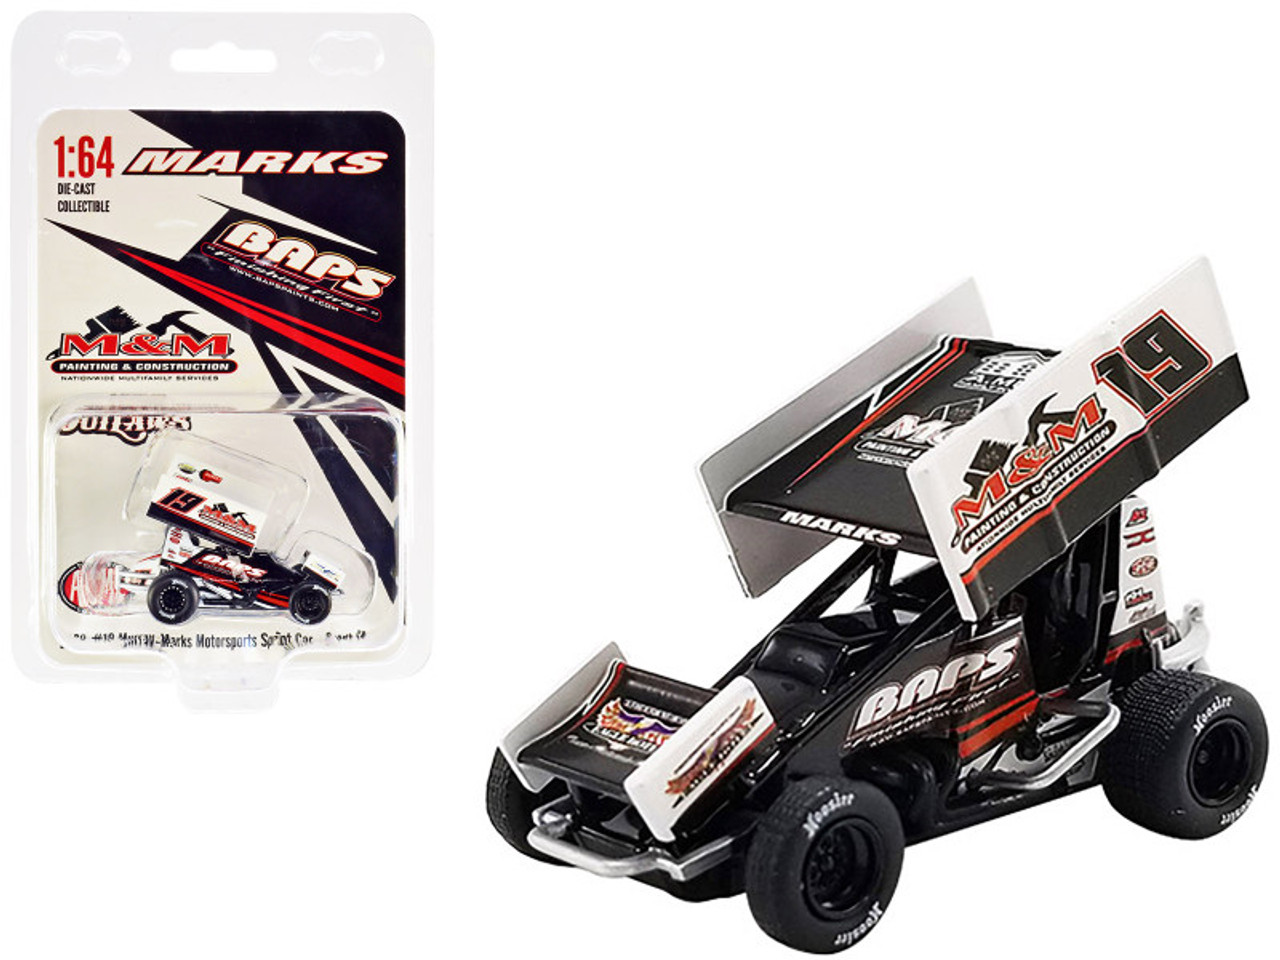 Winged Sprint Car #19 Brent Marks "BAPS Paints" Murray-Marks Motorsports "World of Outlaws" (2022) 1/64 Diecast Model Car by ACME